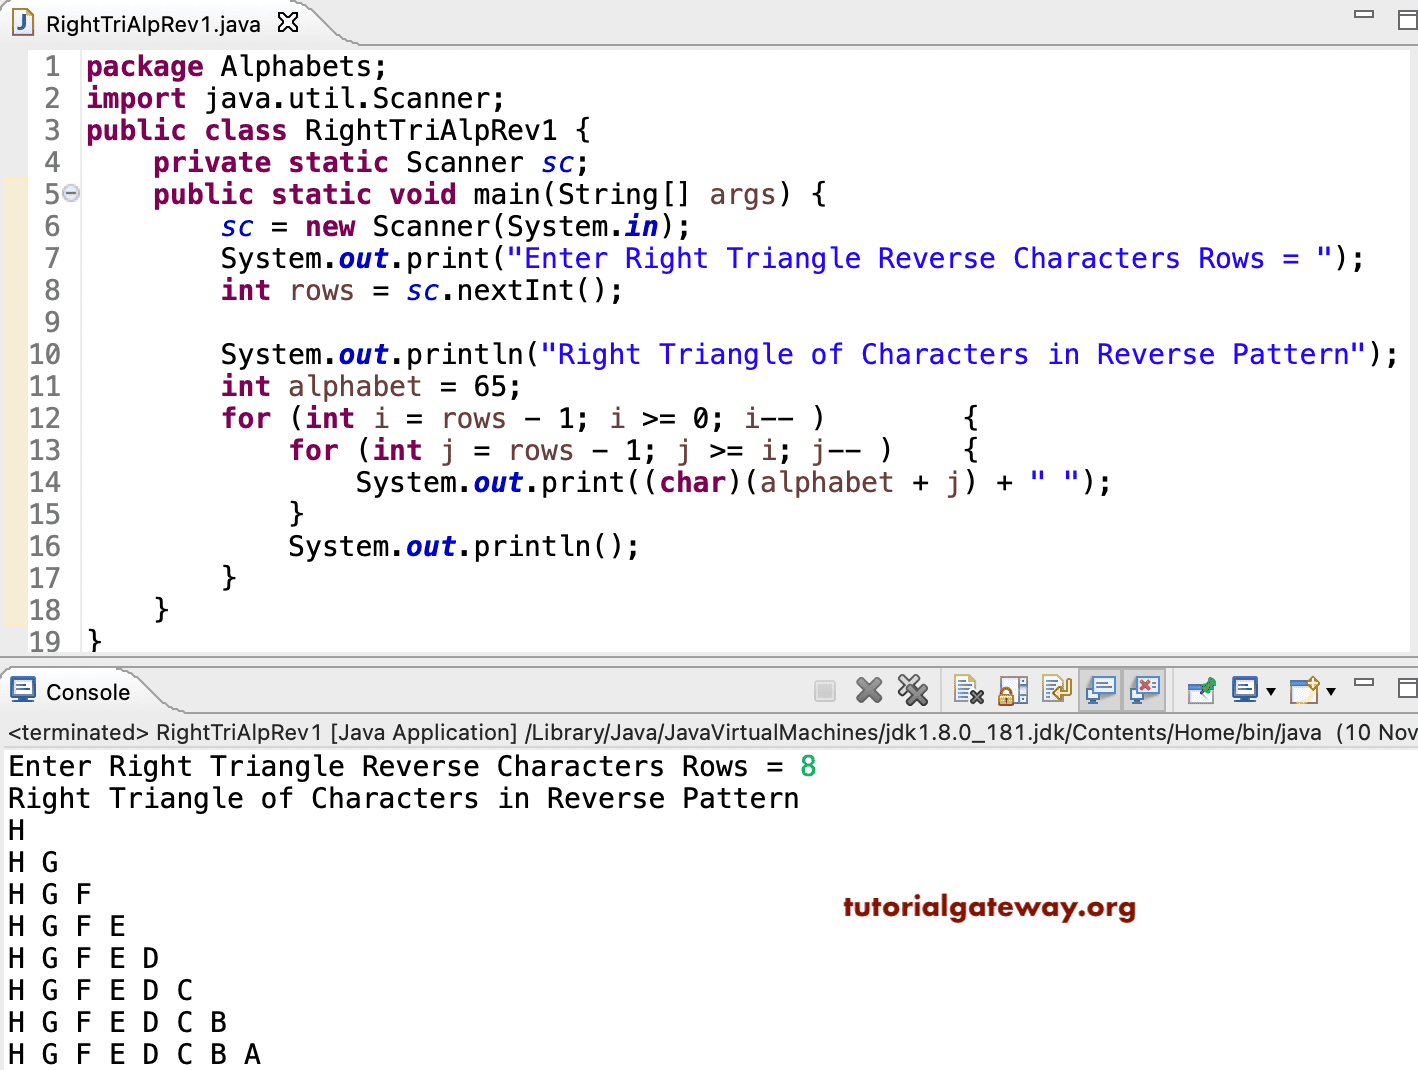 Java Program to Print Right Triangle of Alphabets in Reverse